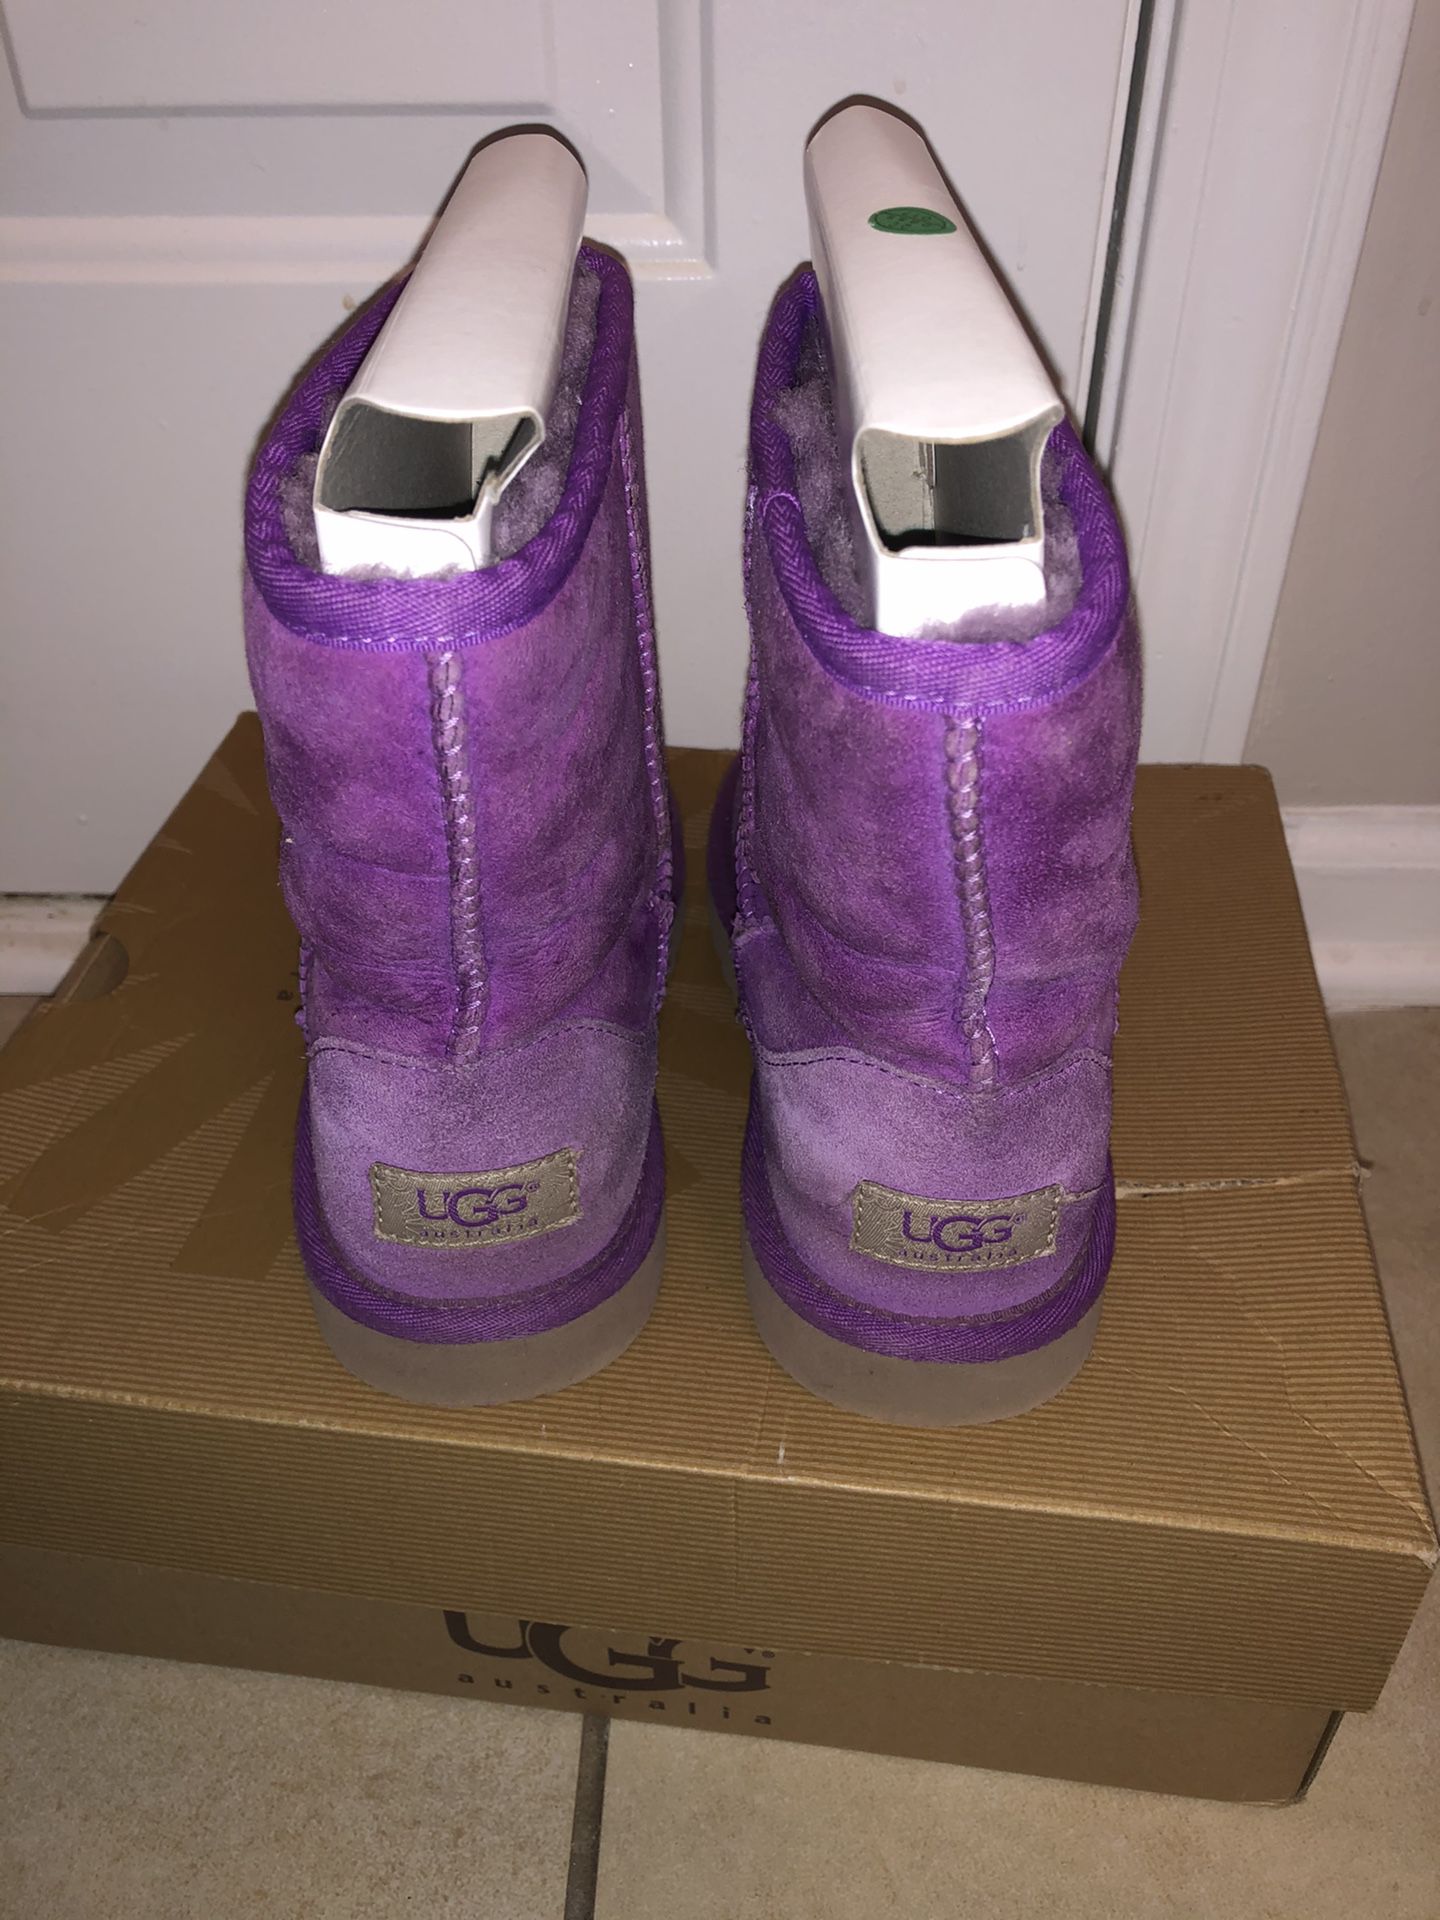 Ugg boots. Girls size 4